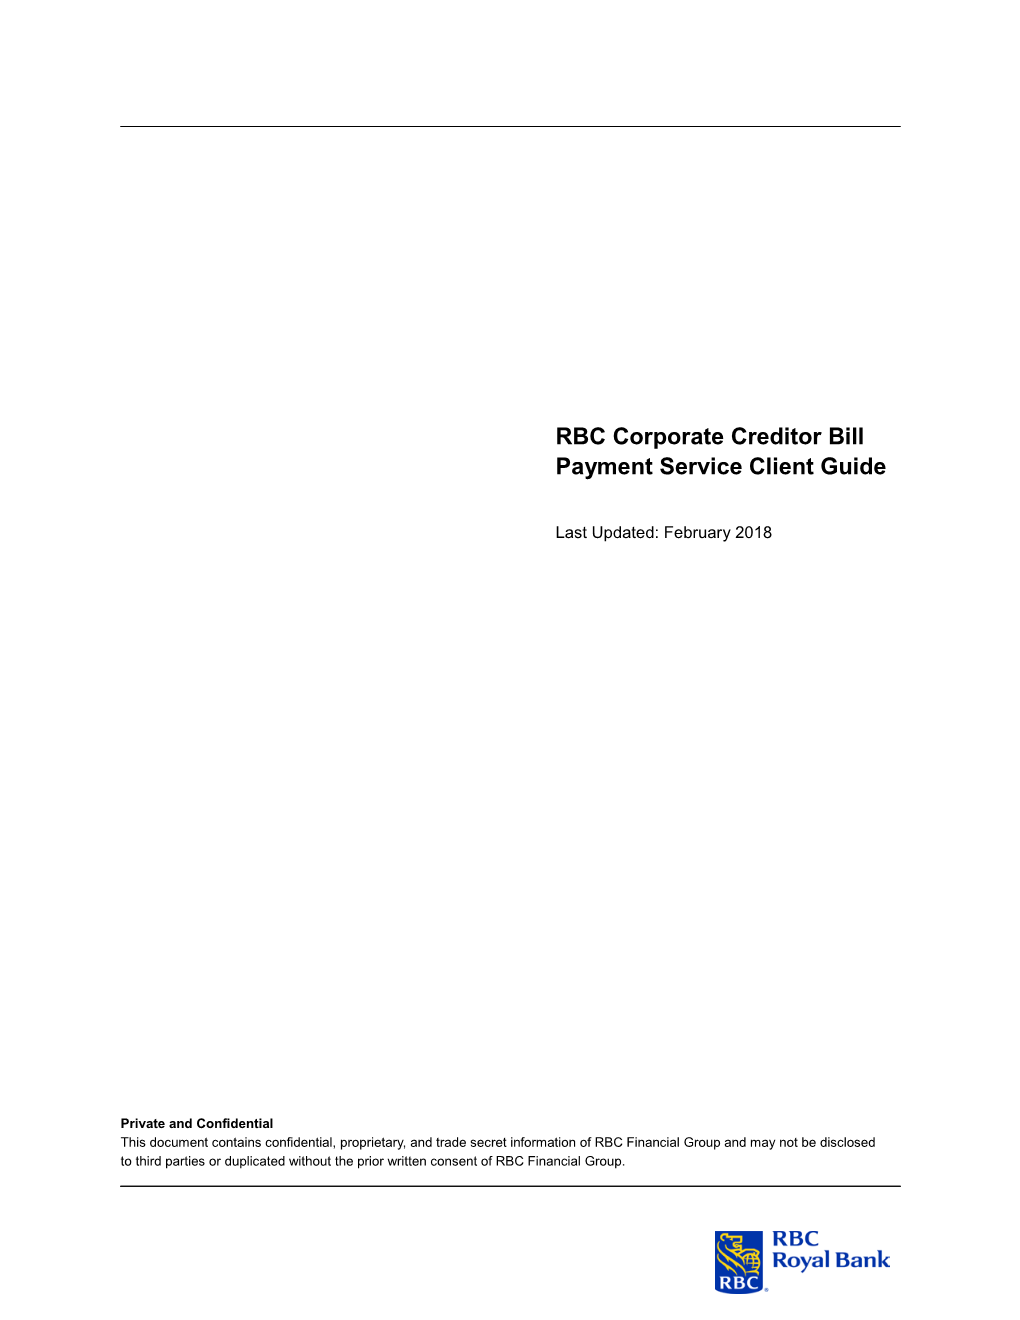 RBC Corporate Creditor Bill Payment Service Client Guide (PDF)